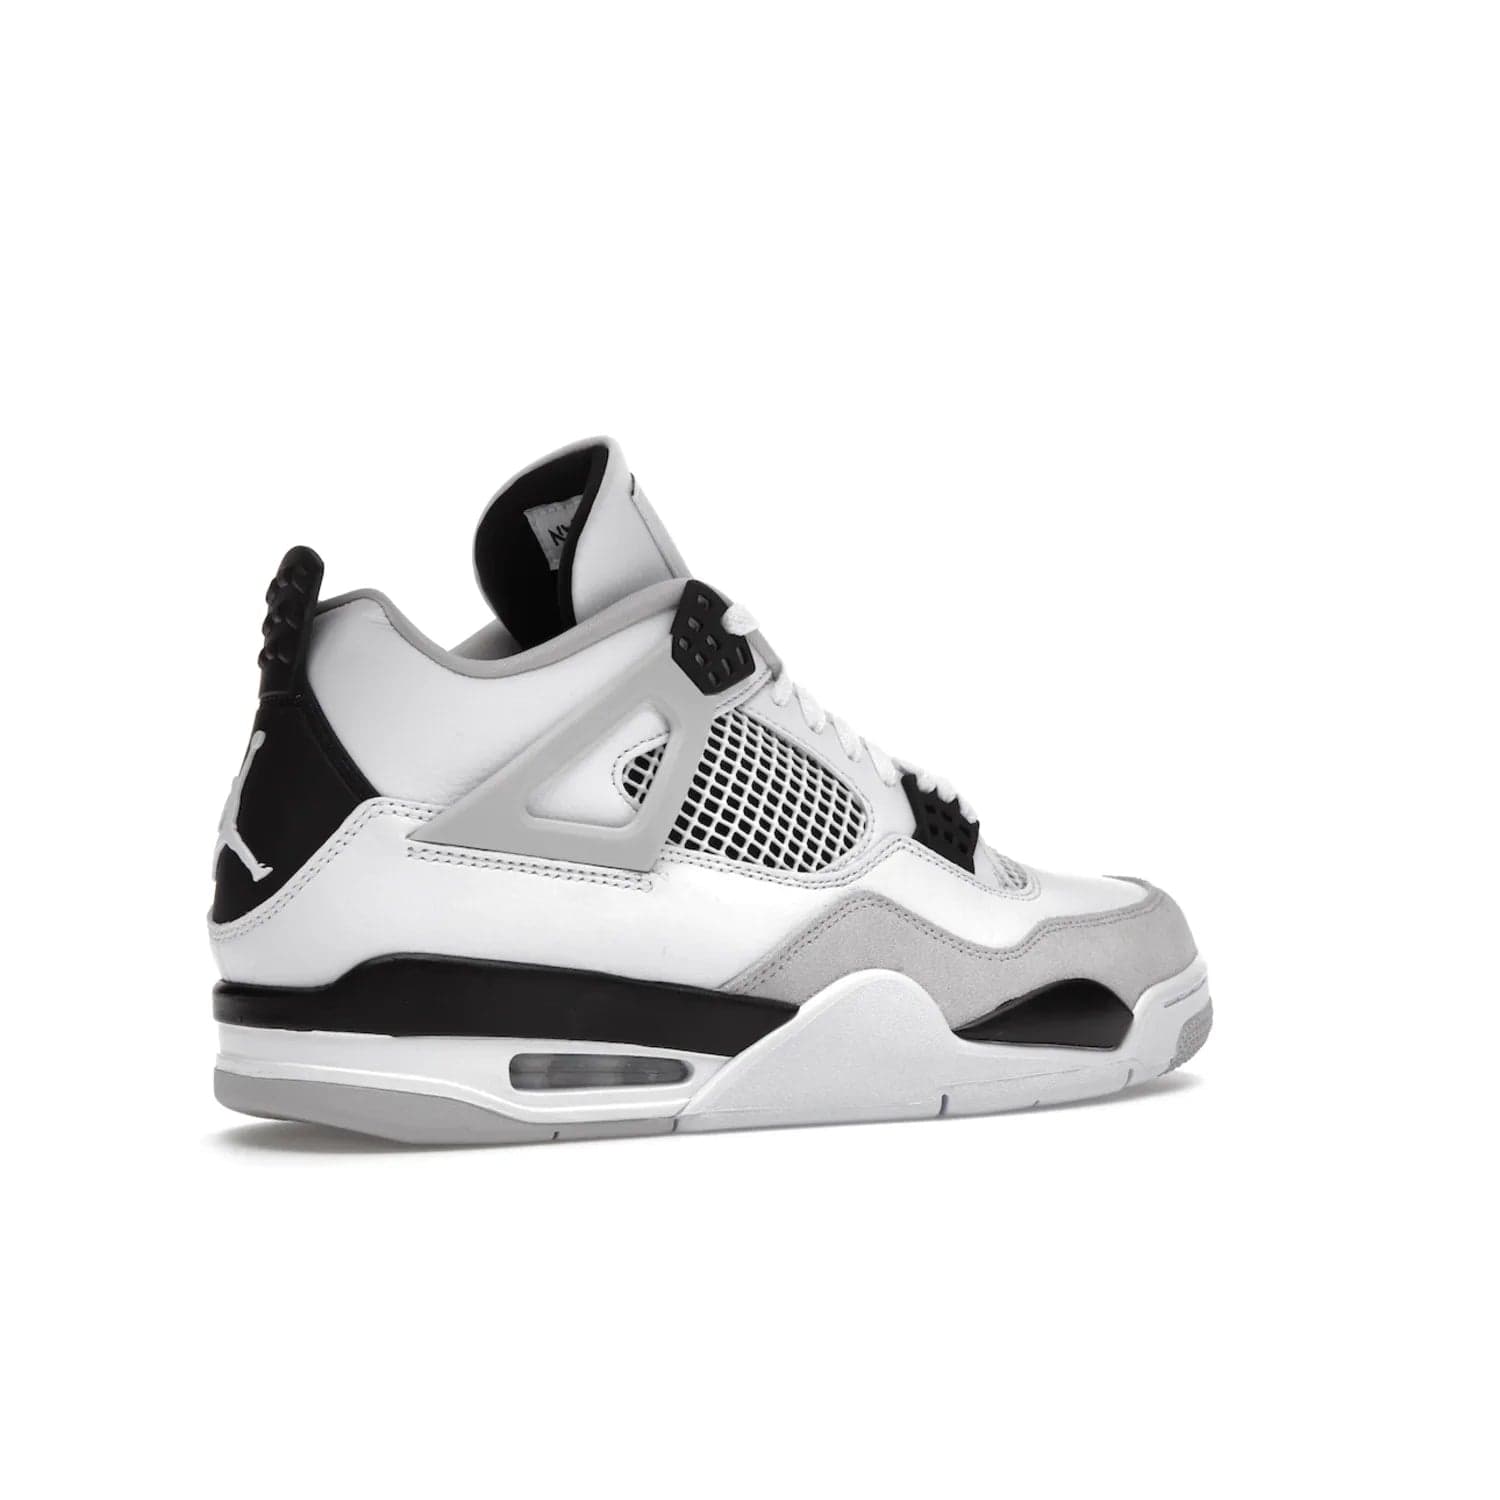 Jordan 4 Retro Military Black - Image 34 - Only at www.BallersClubKickz.com - Updated Air Jordan 4 style with a white/black/light grey sole and visible Air unit. Released in May 2022, offering timeless classic style and comfort.